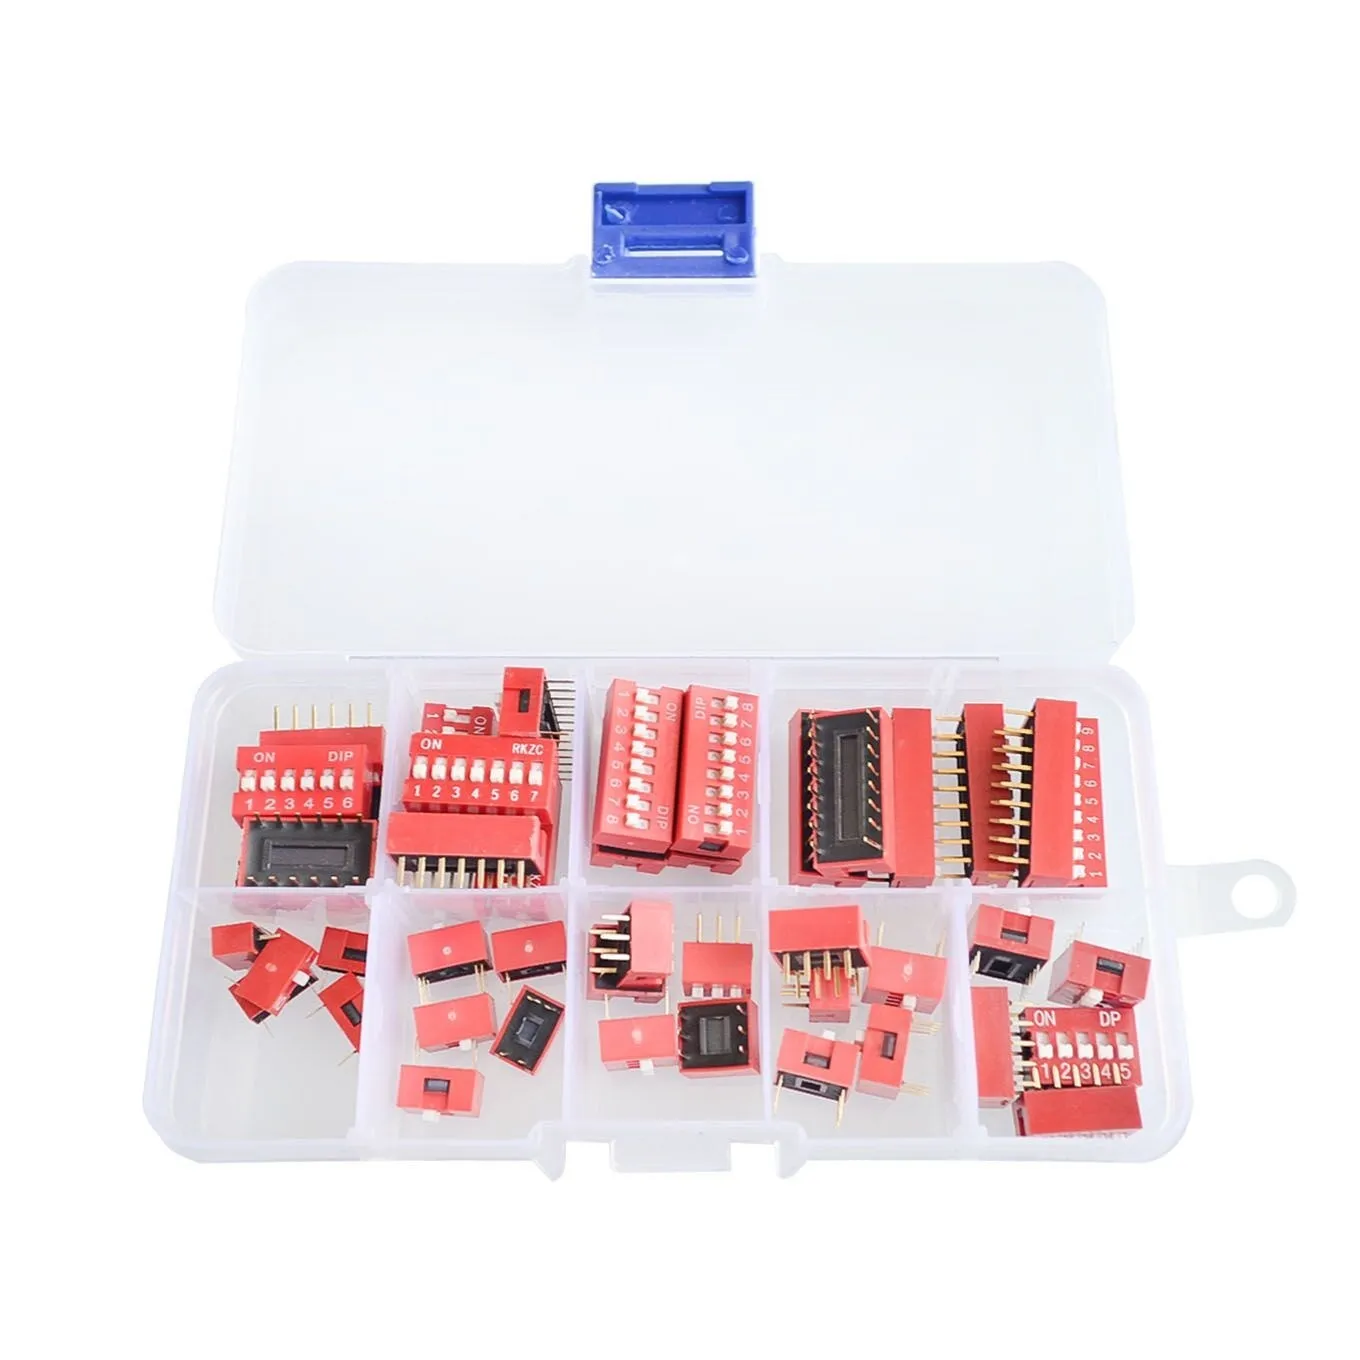 

45PCS/LOT Dip Switch Kit In Box 1 2 3 4 5 6 7 8 9Way 2.54mm Toggle Switch Red Snap Switches Mixed Kit Each 5PCS Combination Set